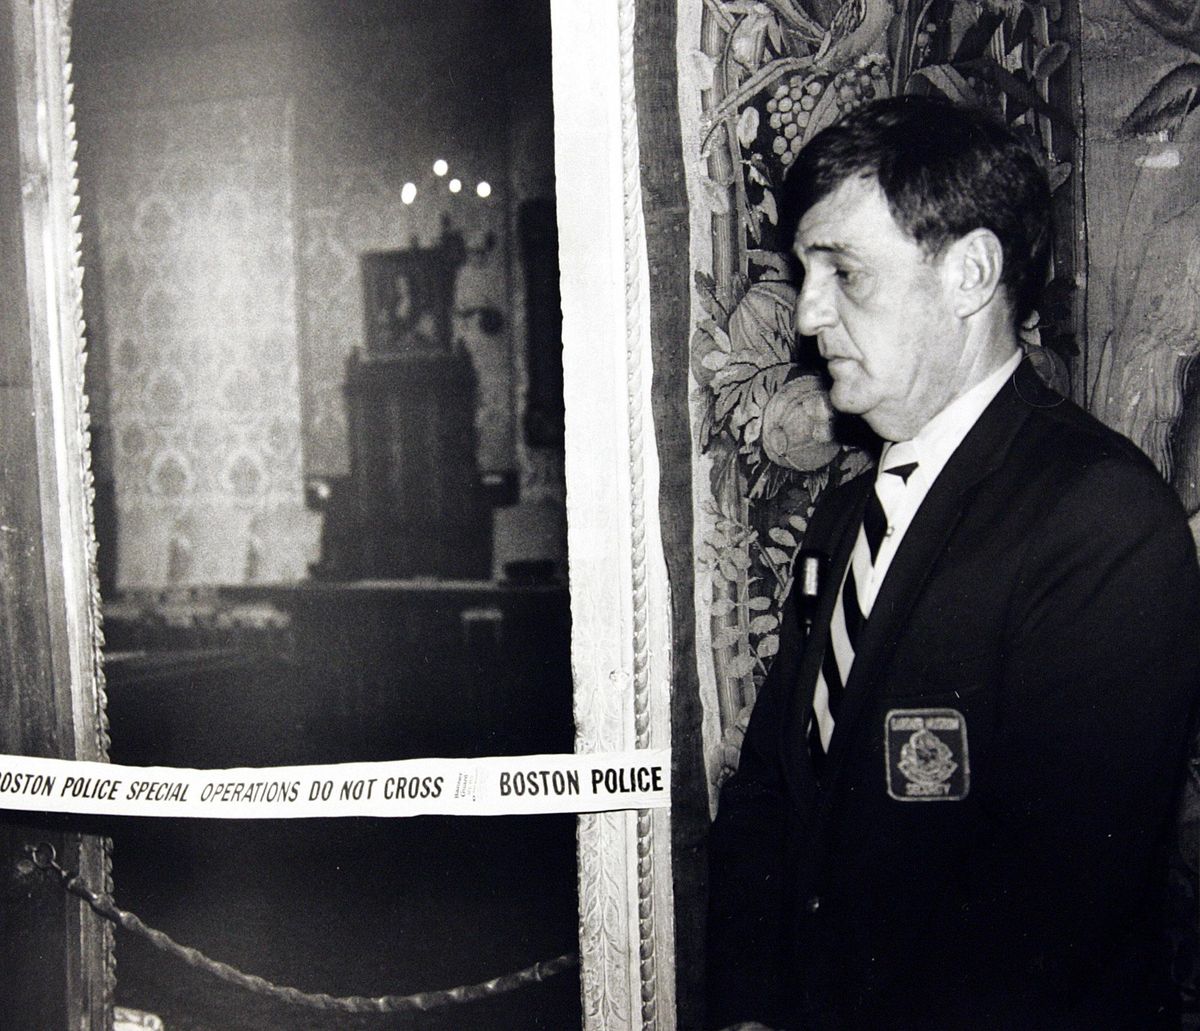 In this March 21, 1990 file photo, a security guard stands outside the Dutch Room of the Isabella Stewart Gardner Museum in Boston, where robbers stole more than a dozen works of art by Rembrandt, Vermeer, Degas, Manet and others, in an early morning robbery March 18, 1990. A Dutch sleuth has his sights set on what he calls the Holy Grail of stolen art: A collection worth $500 million snatched in 1990 in the largest art heist in U.S. history from Bostons Isabella Stewart Gardner Museum. (Associated Press)